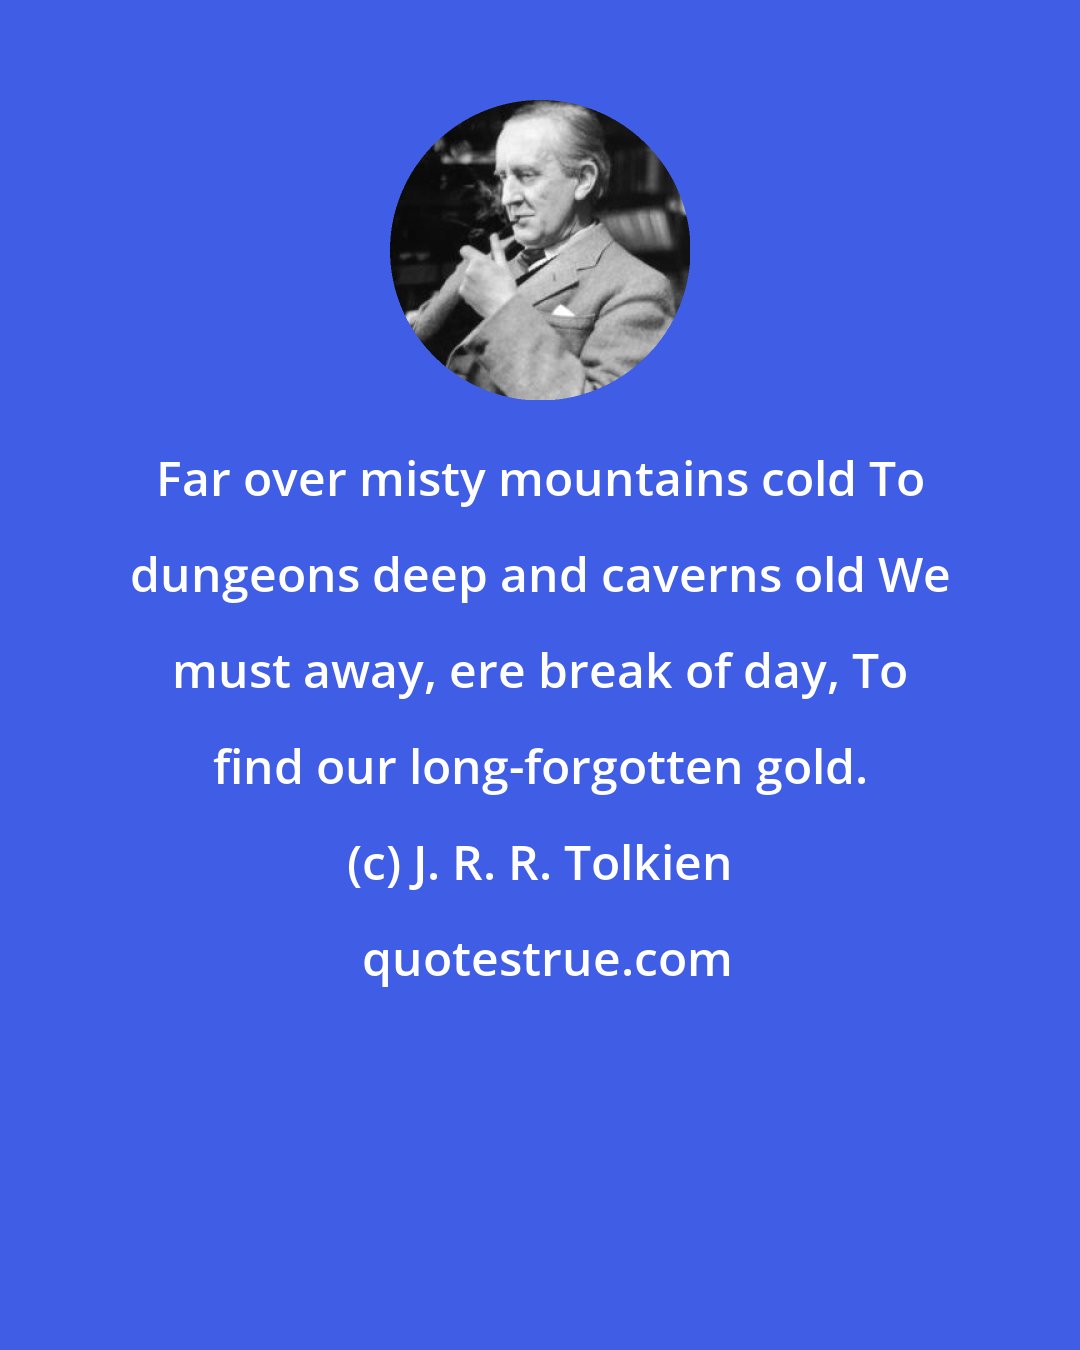 J. R. R. Tolkien: Far over misty mountains cold To dungeons deep and caverns old We must away, ere break of day, To find our long-forgotten gold.